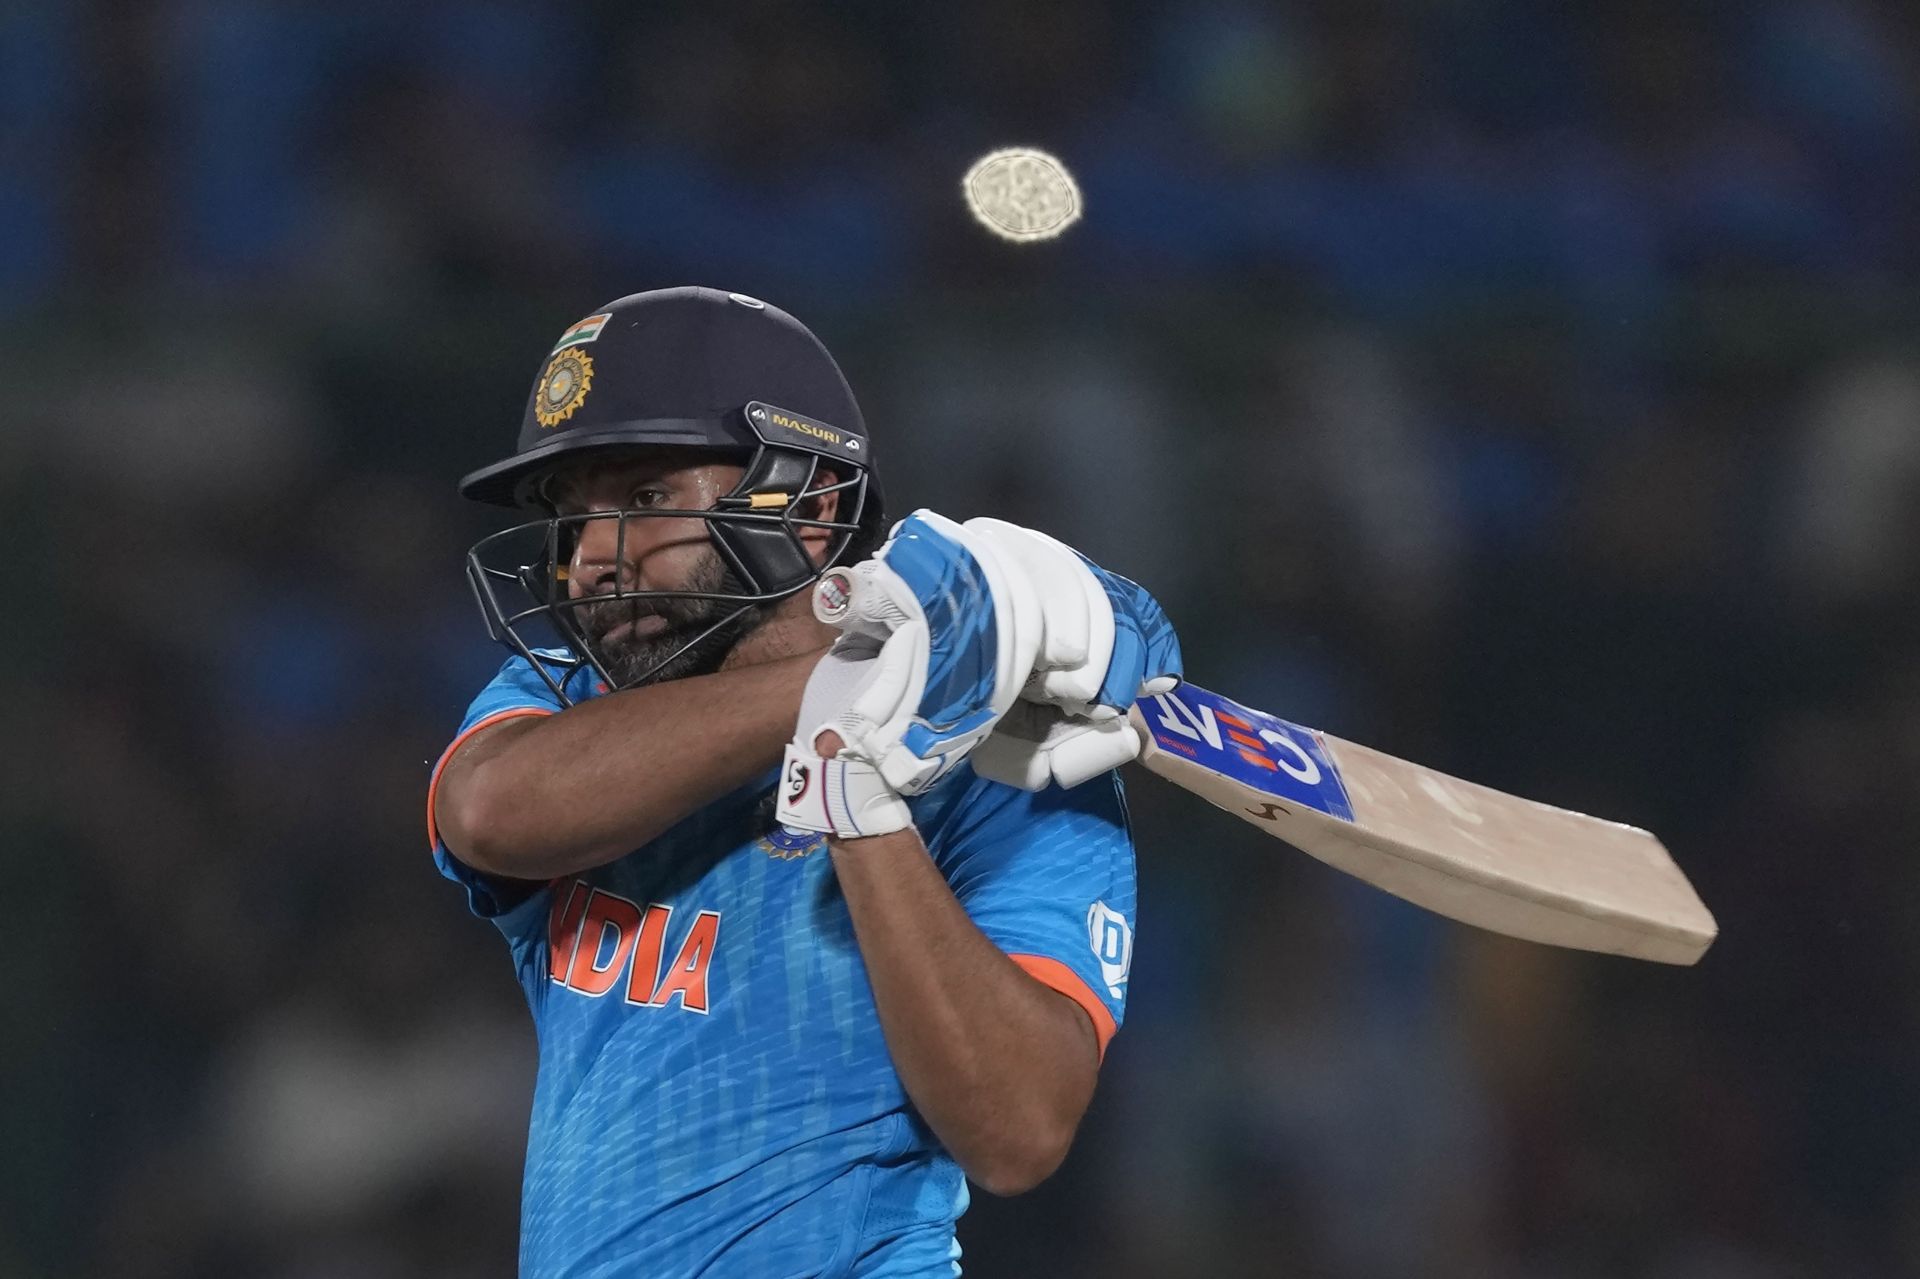 Rohit Sharma struck 16 fours and five sixes during his innings. [P/C: AP]